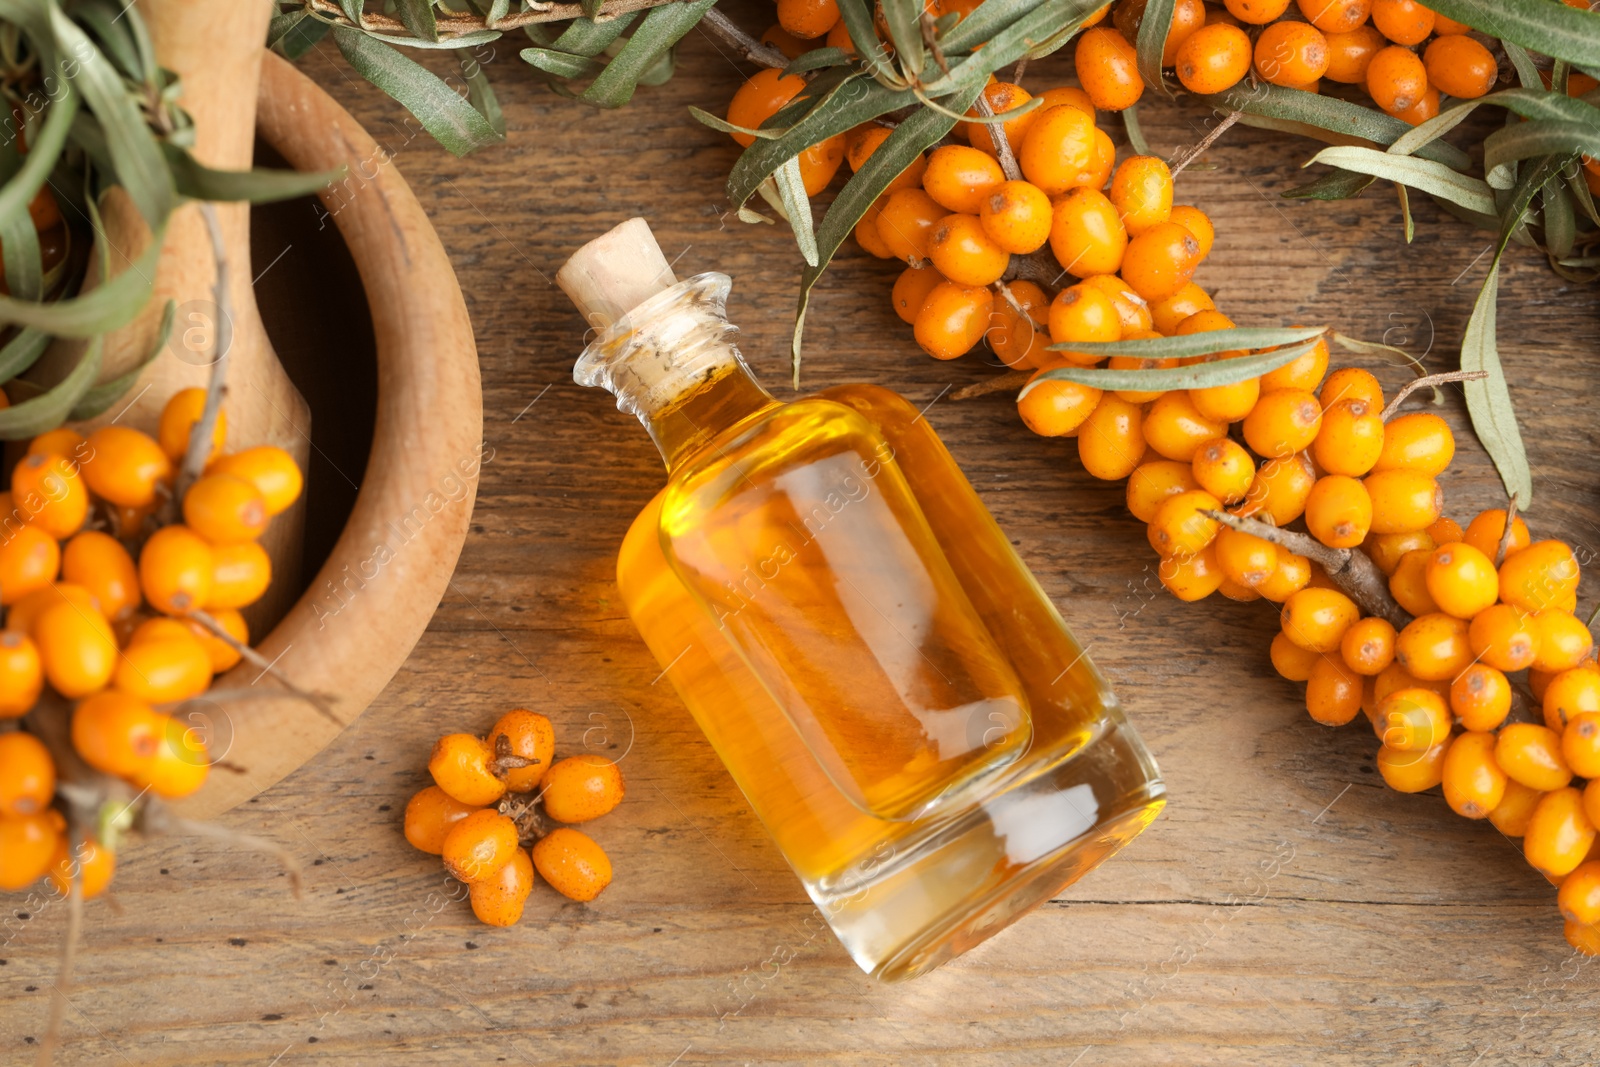 Photo of Natural sea buckthorn oil and fresh berries on wooden table, flat lay